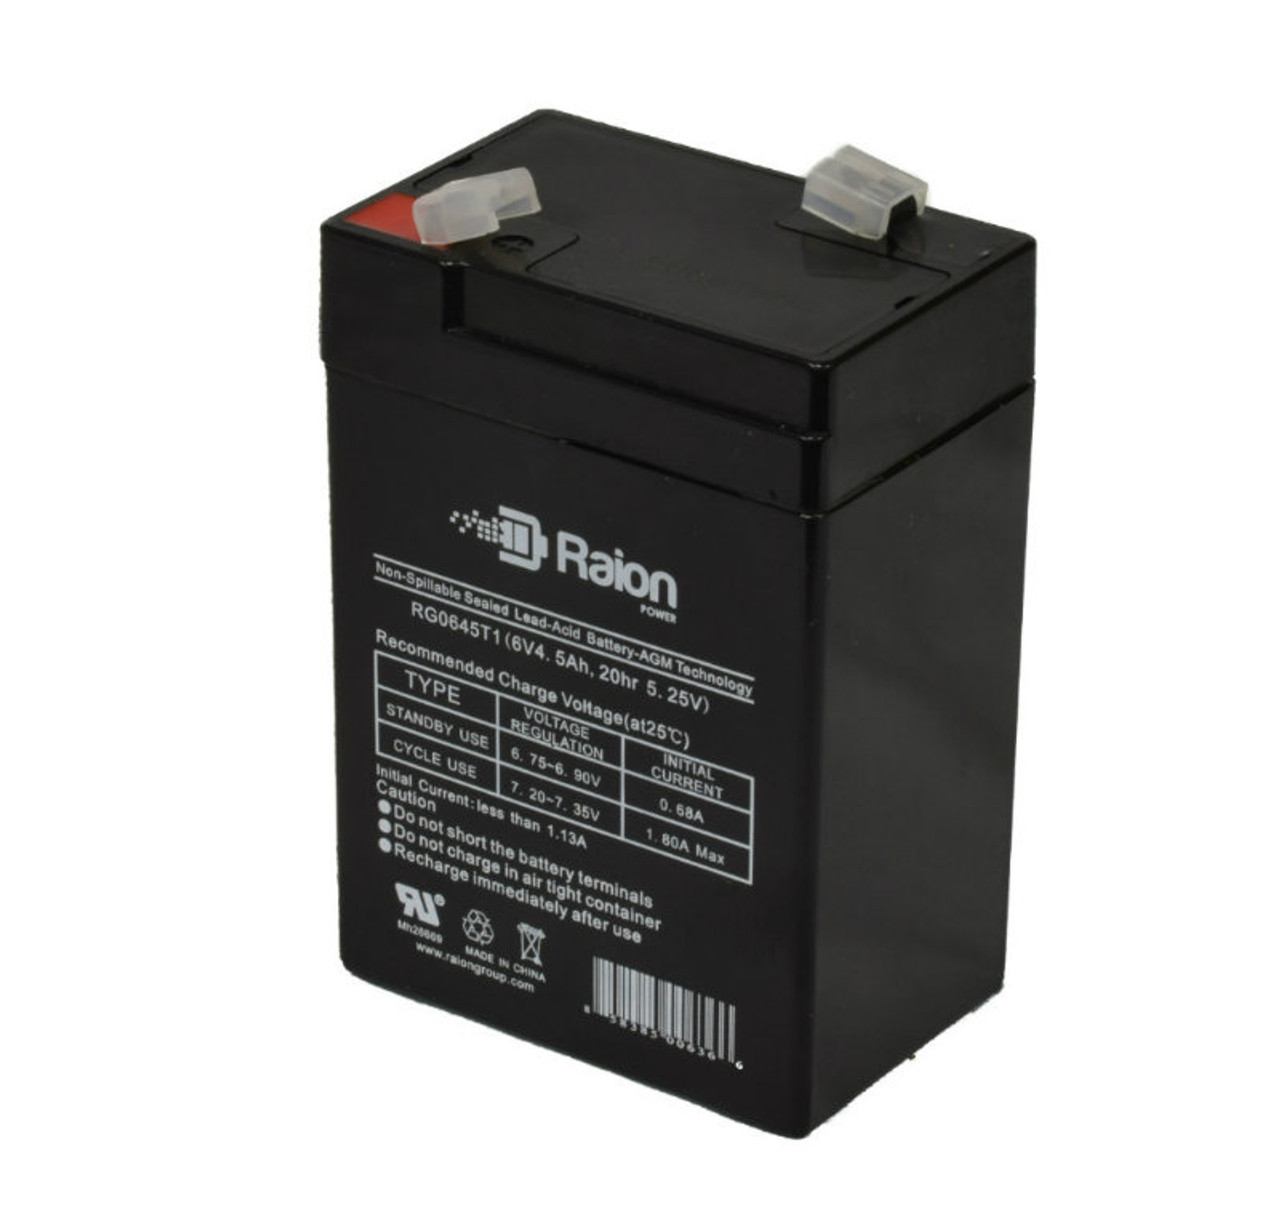 Raion Power RG0645T1 6V 4.5Ah Replacement Battery Cartridge for Orion Research Electrolyte Analyzer